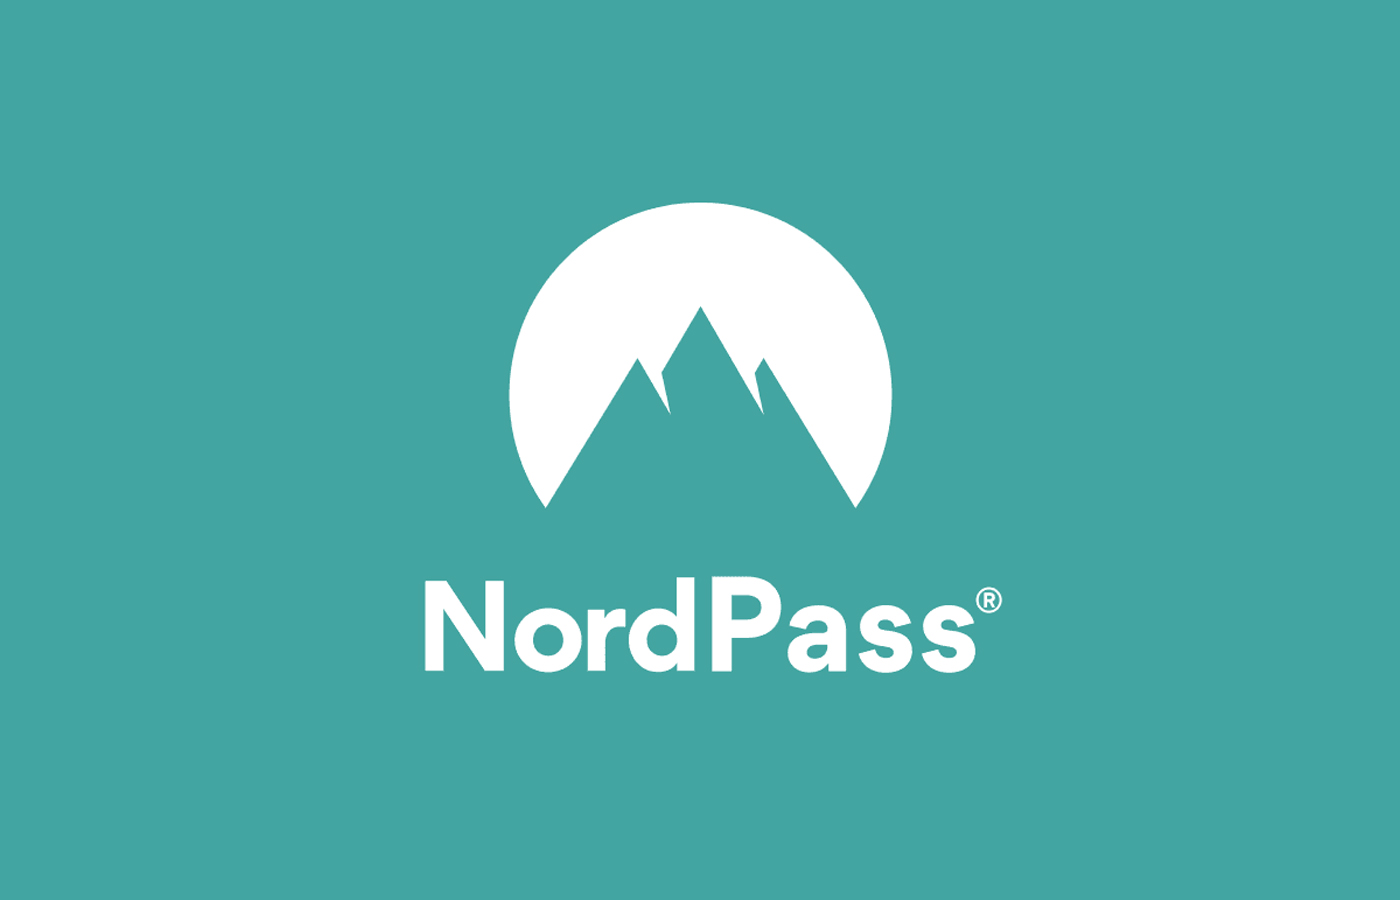 tr_20240109-how-to-use-nordpass.jpg